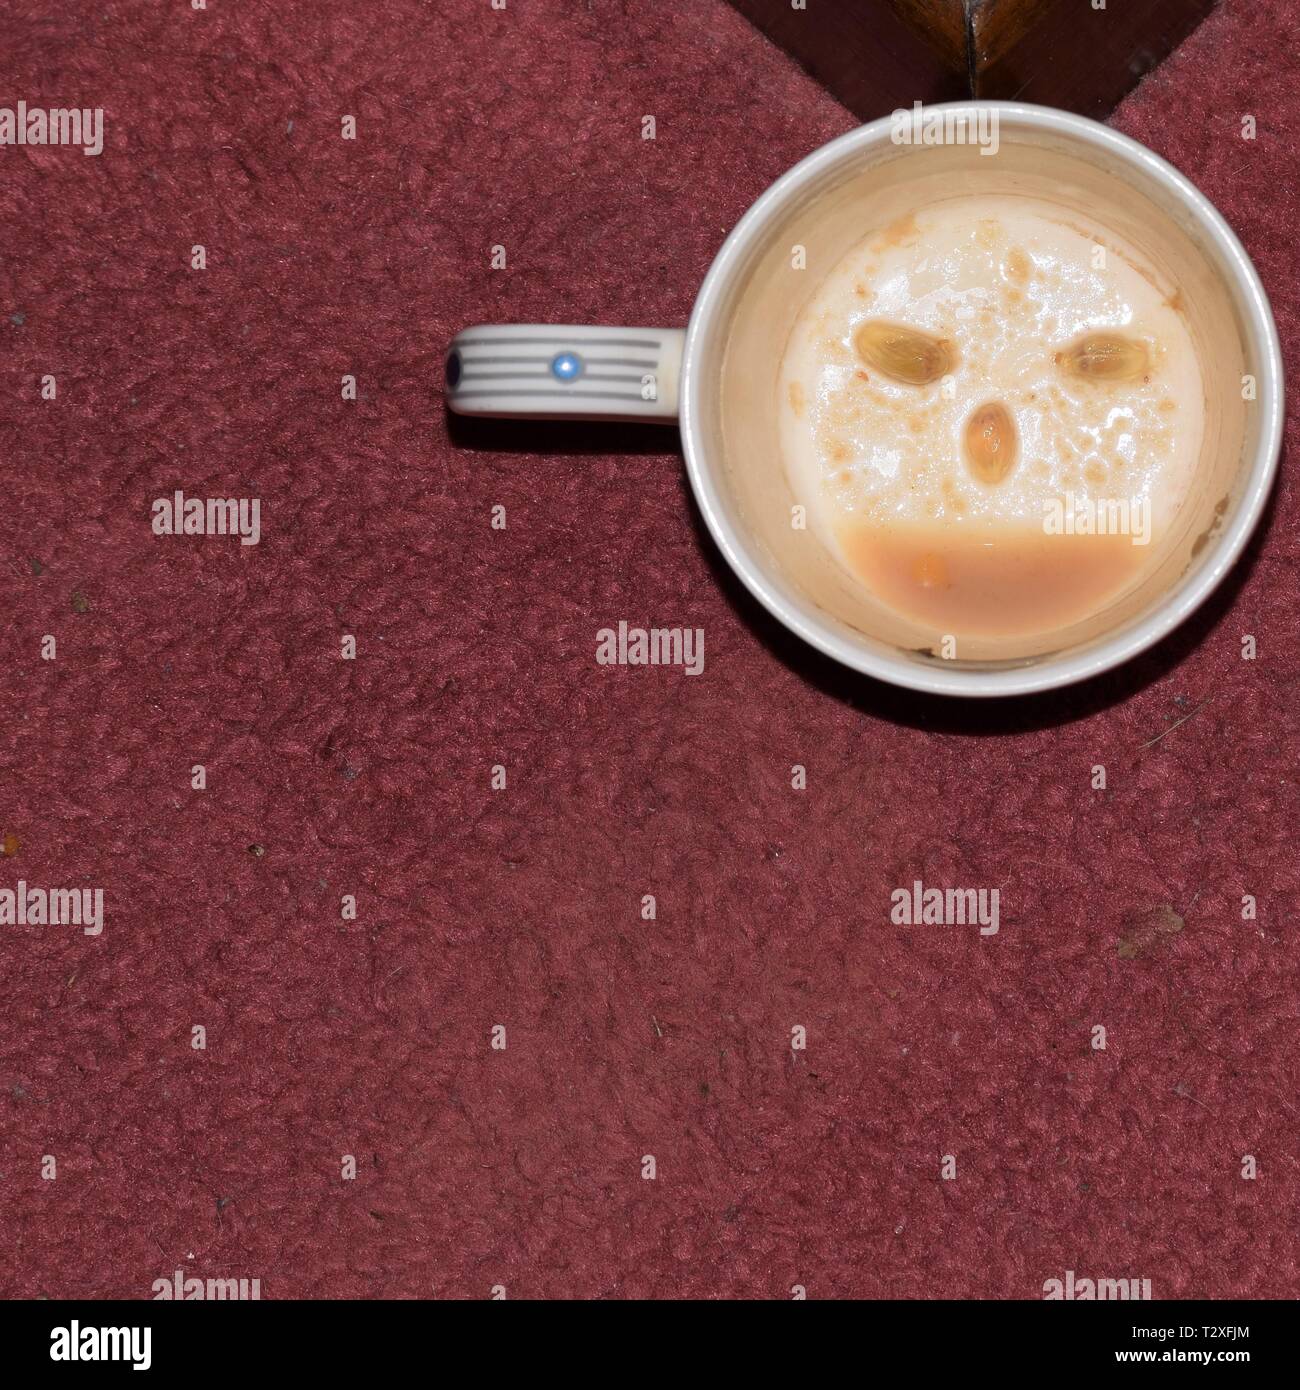 A white cup, on a carpet, with a smiley face designed with lemon pip eyes and coffee dregs mouth. Fun to amuse children and folk in a festive mood. Stock Photo